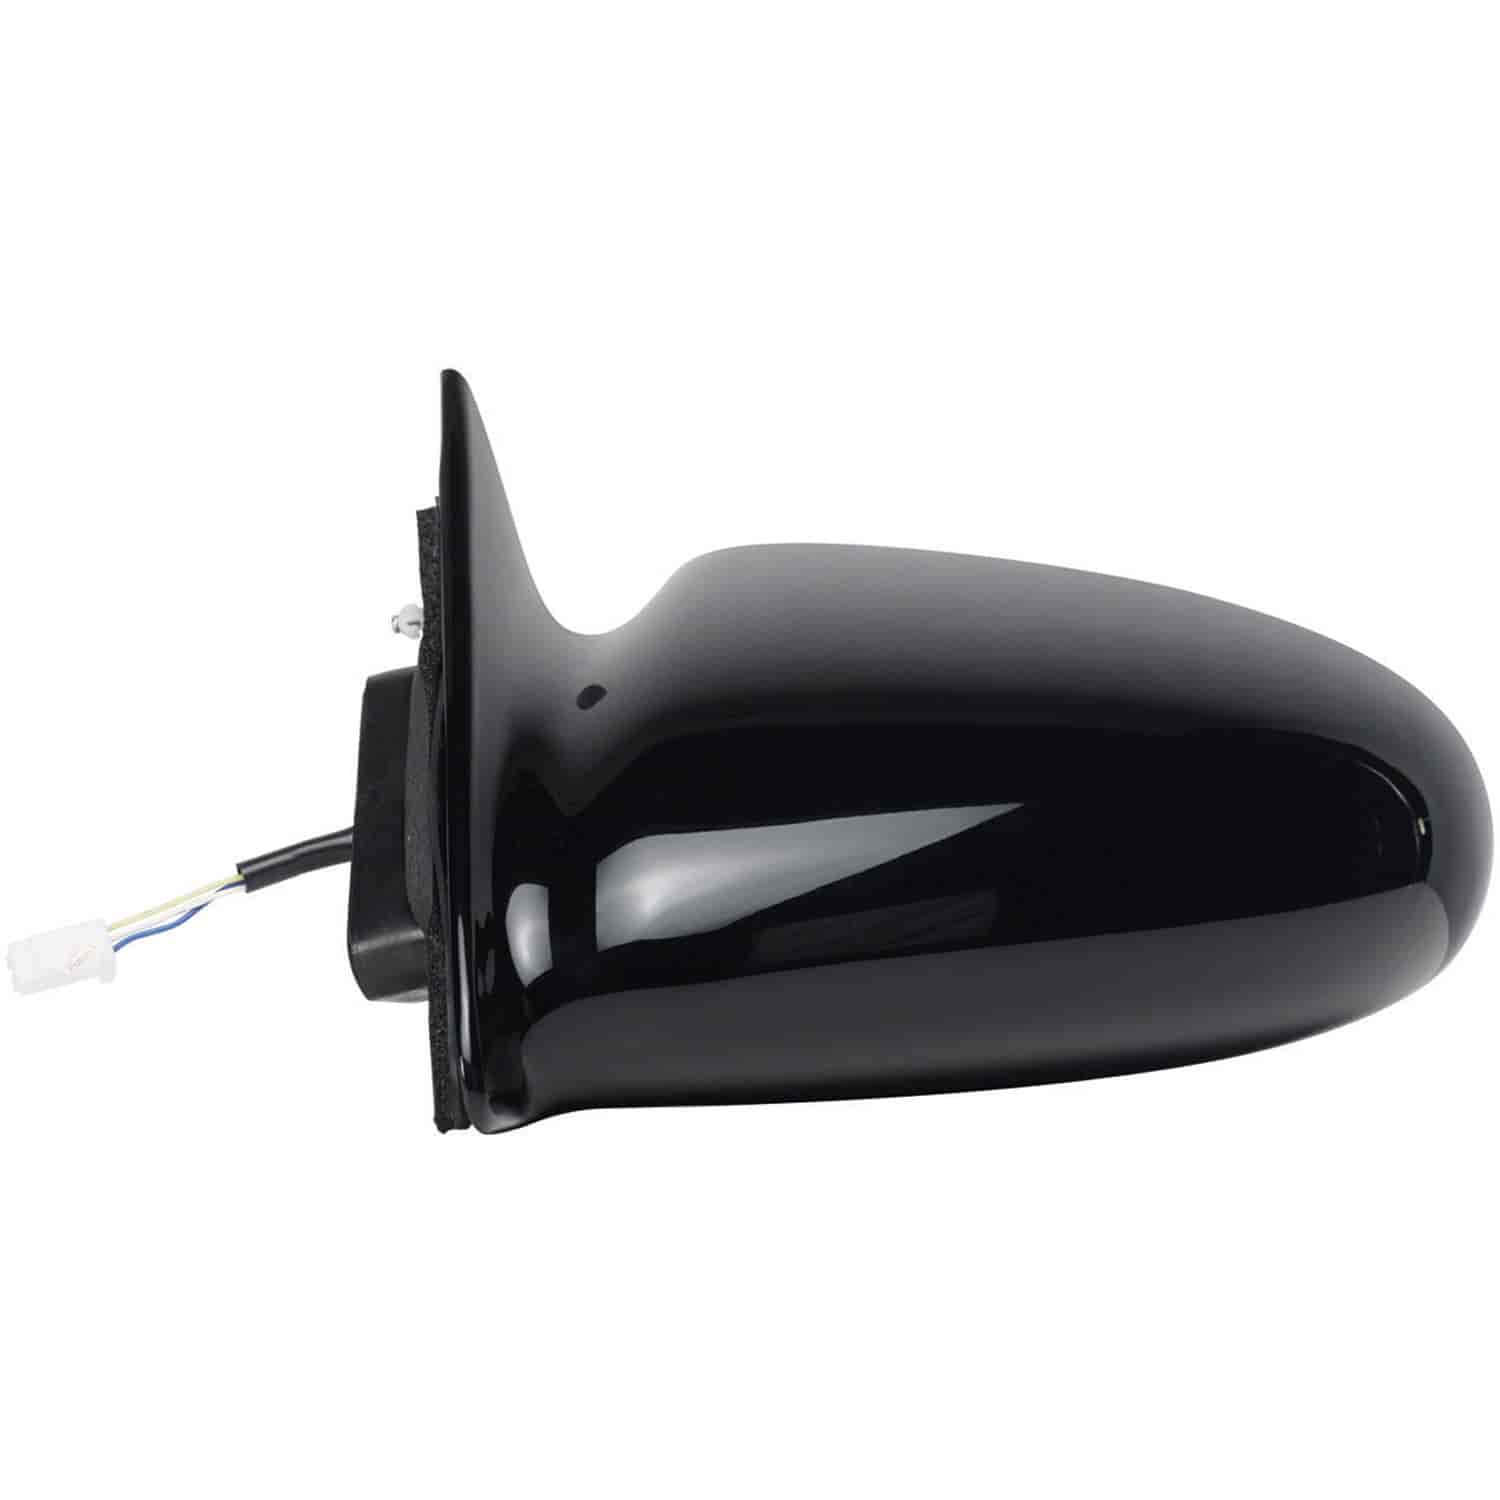 OEM Style Replacement mirror for 93-97 GEO Prizm driver side mirror tested to fit and function like